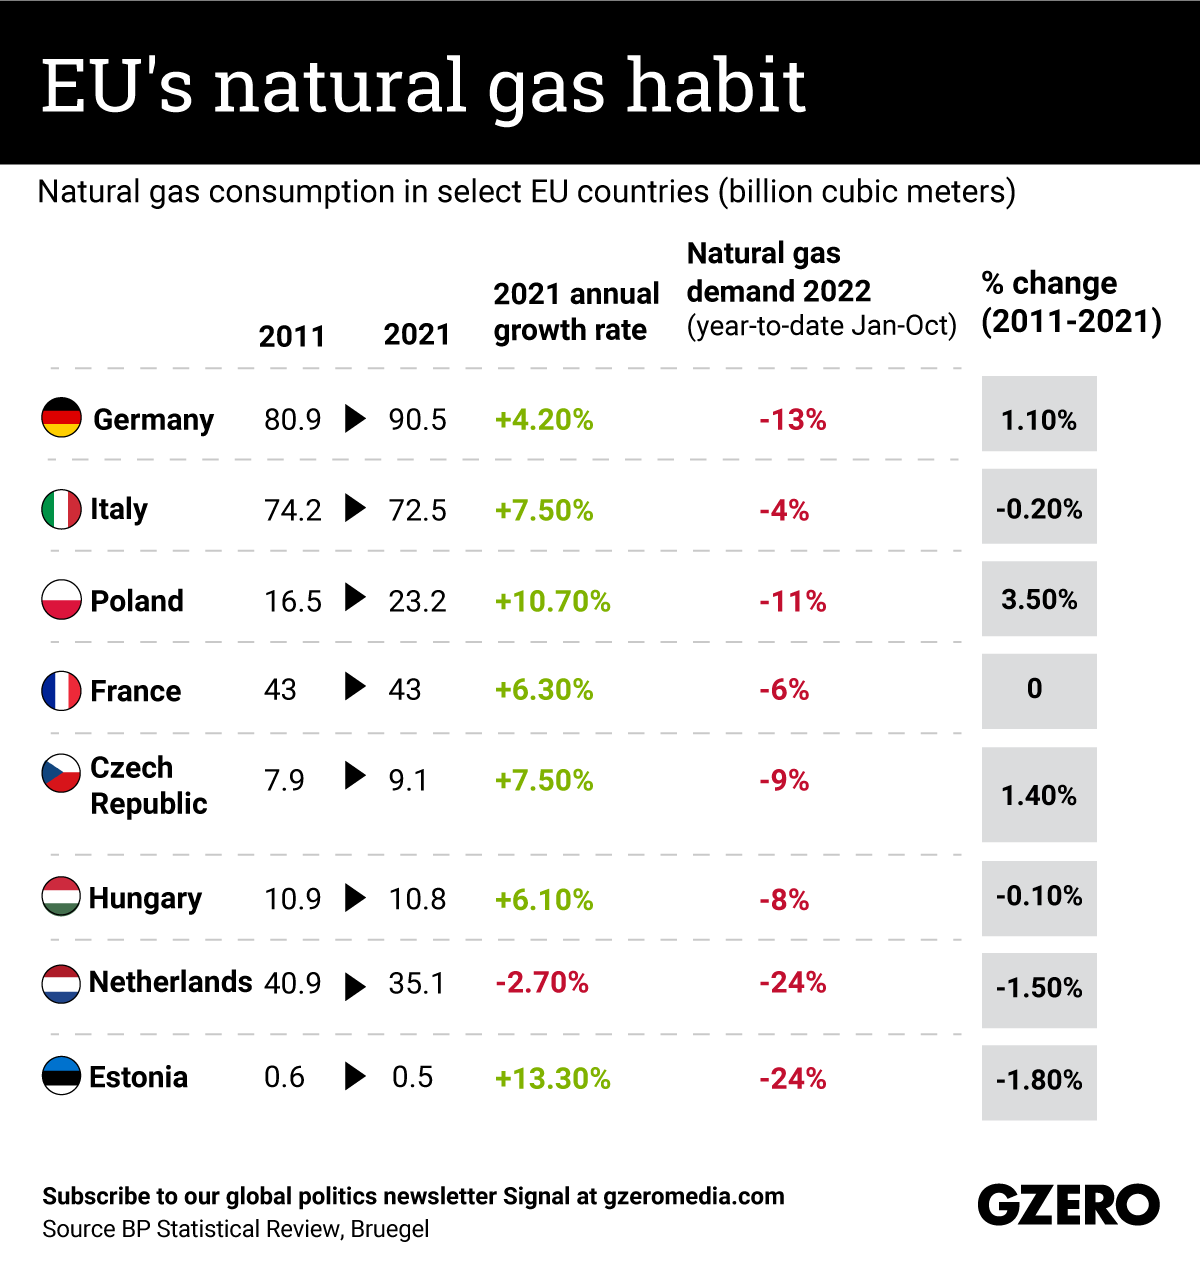 The Graphic Truth: EU's natural gas habit